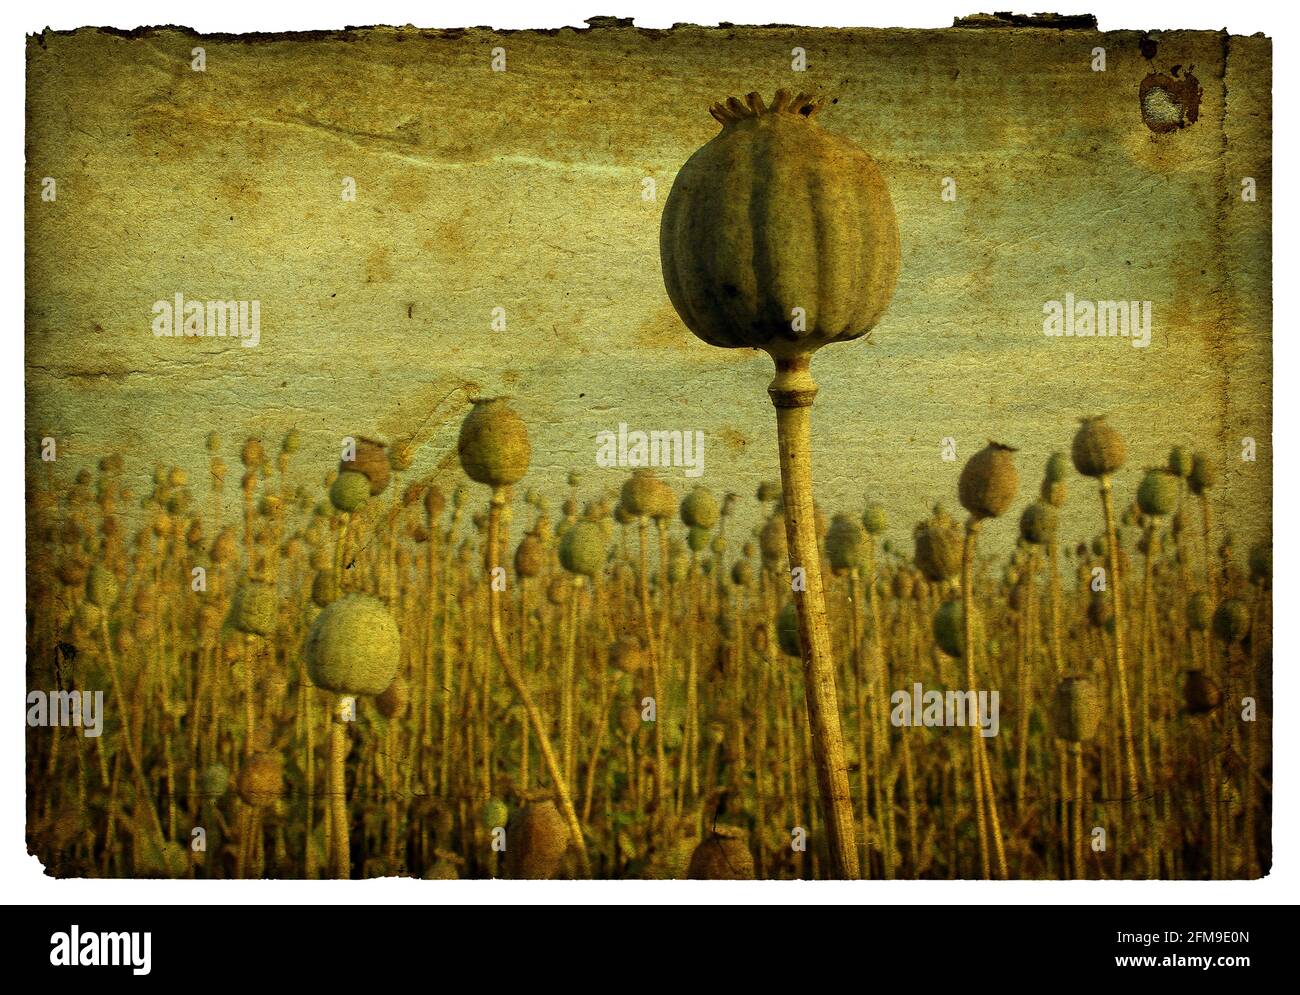 Poppy field in vintage style on paper cardboard with grainy rough surface - retro background Stock Photo